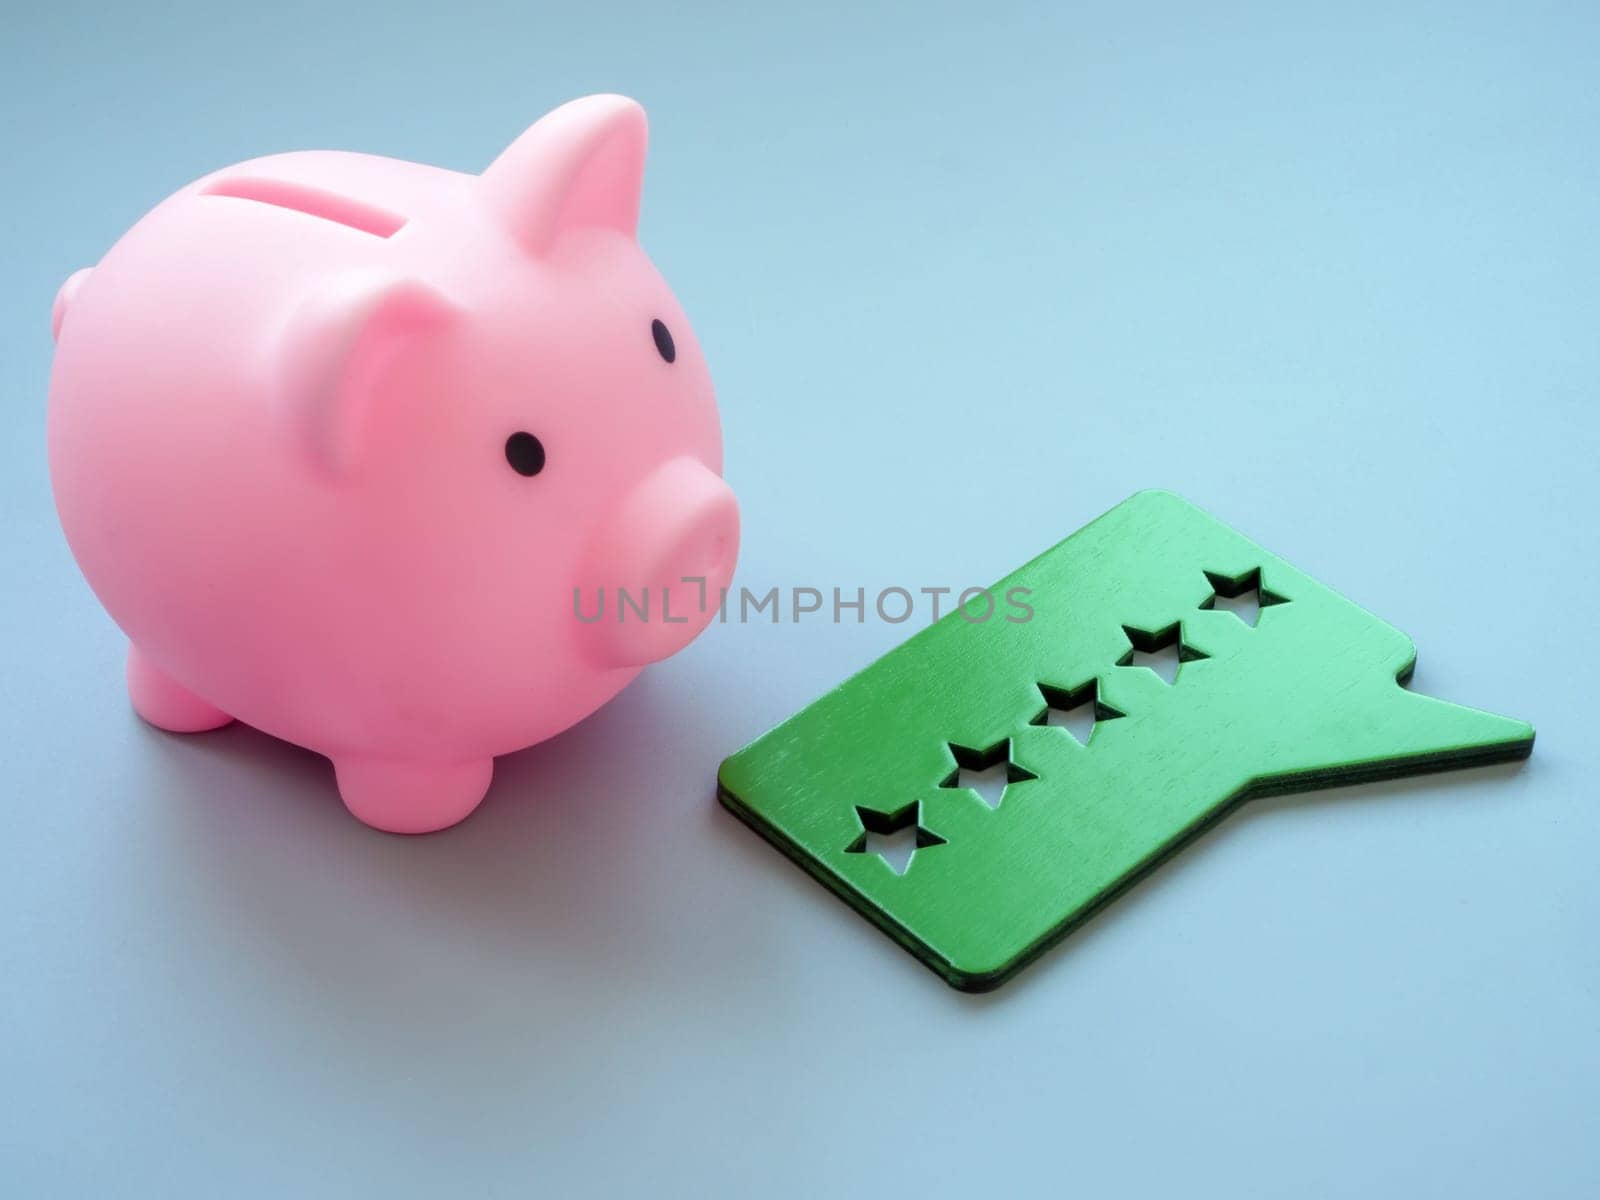 Pink piggy bank and five stars for review. by designer491